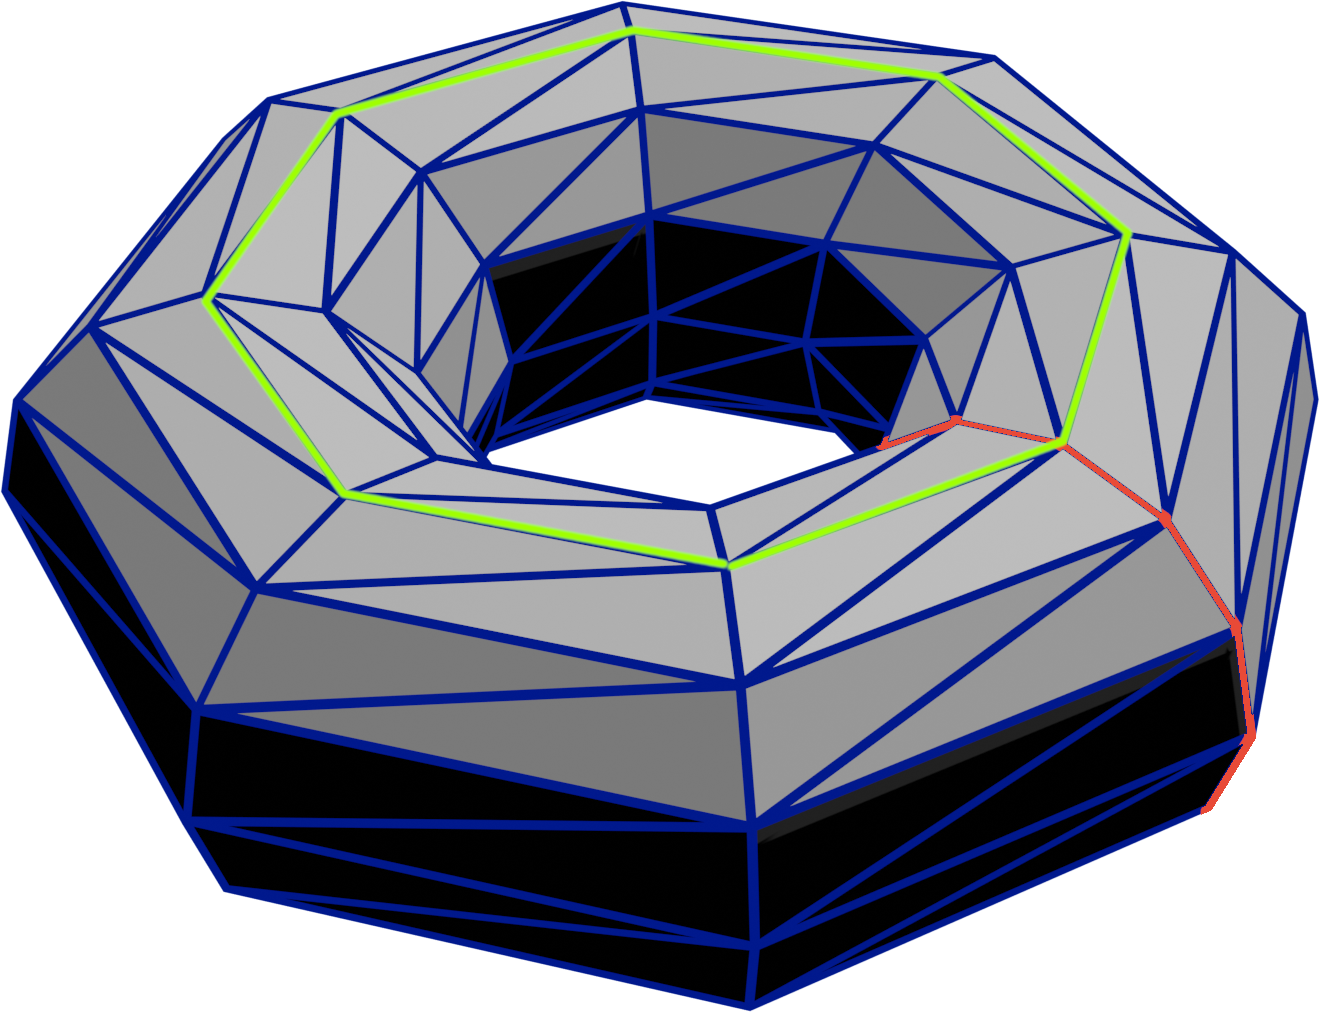 An example torus with polygon boundaries drawn in blue and one of the 8 “slices” highlighted in orange and one of the 12 “rings” highlighted in yellowish green.